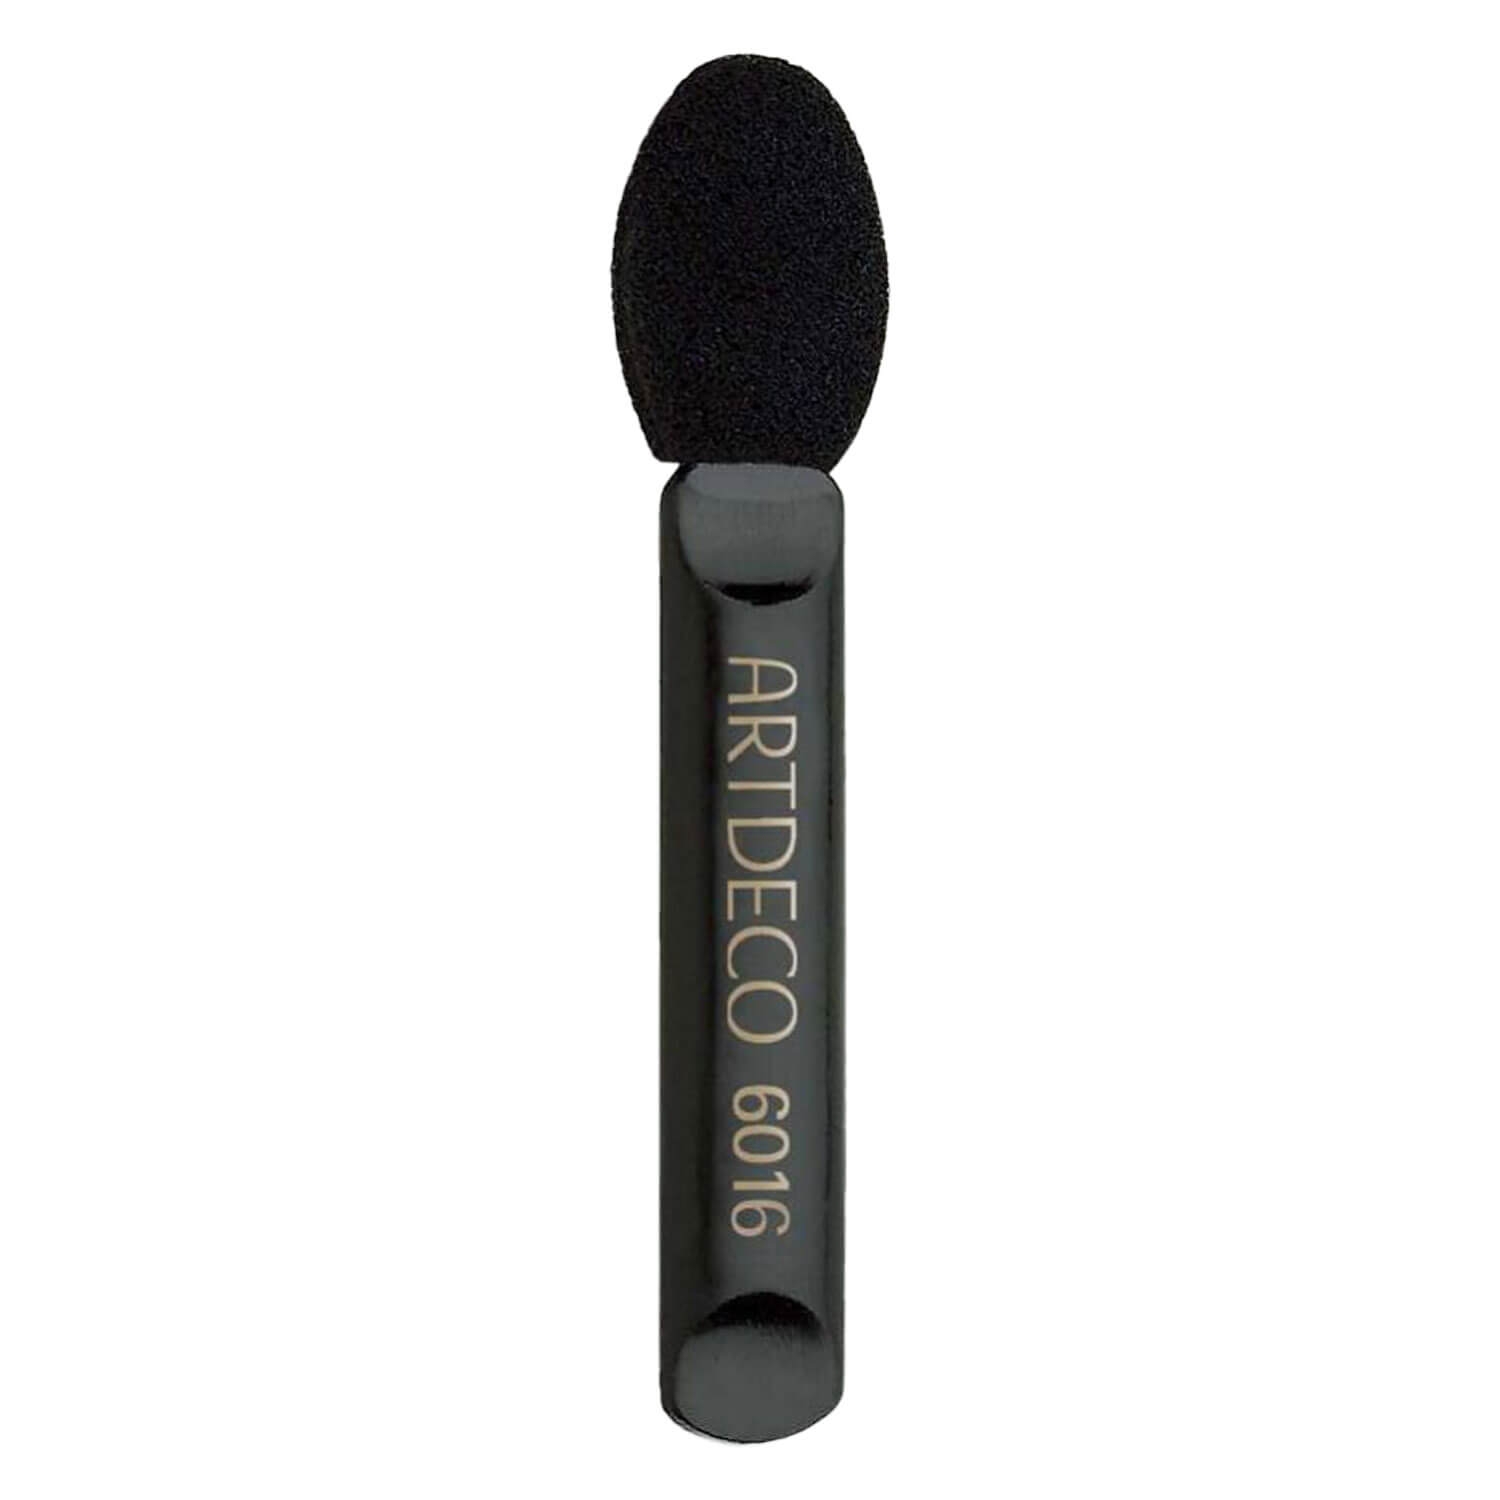 Product image from Artdeco Tools - Eyeshadow Applicator for Beauty Box